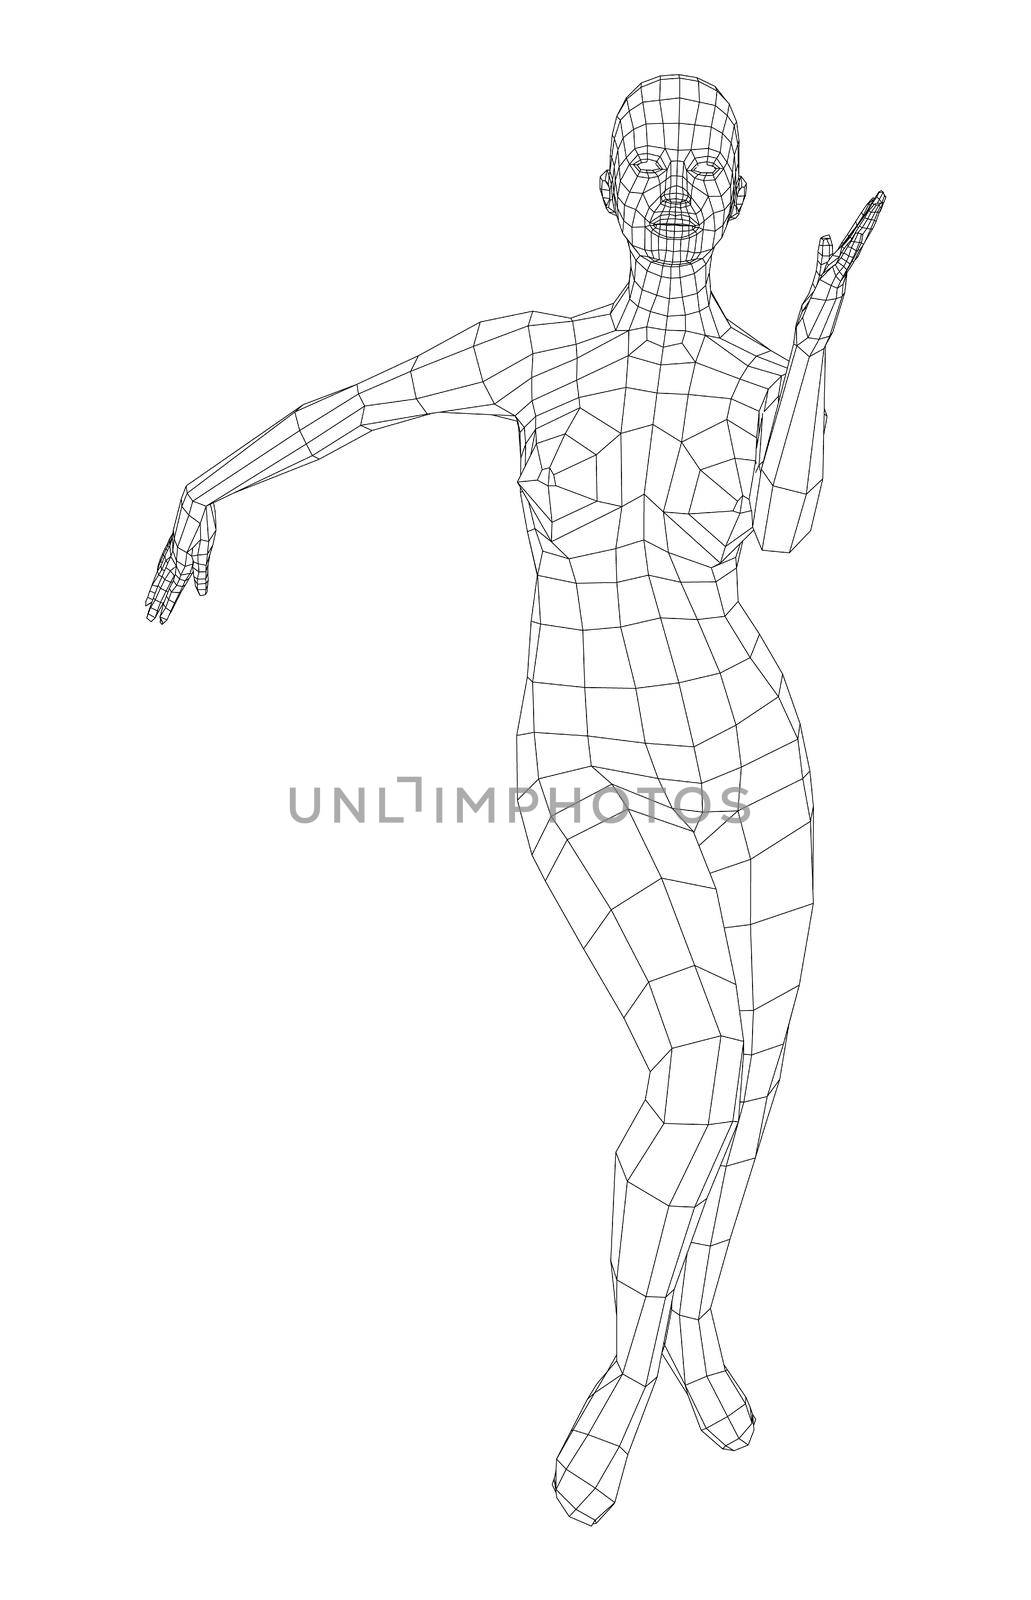 Wireframe ballerina in dance pose by cherezoff